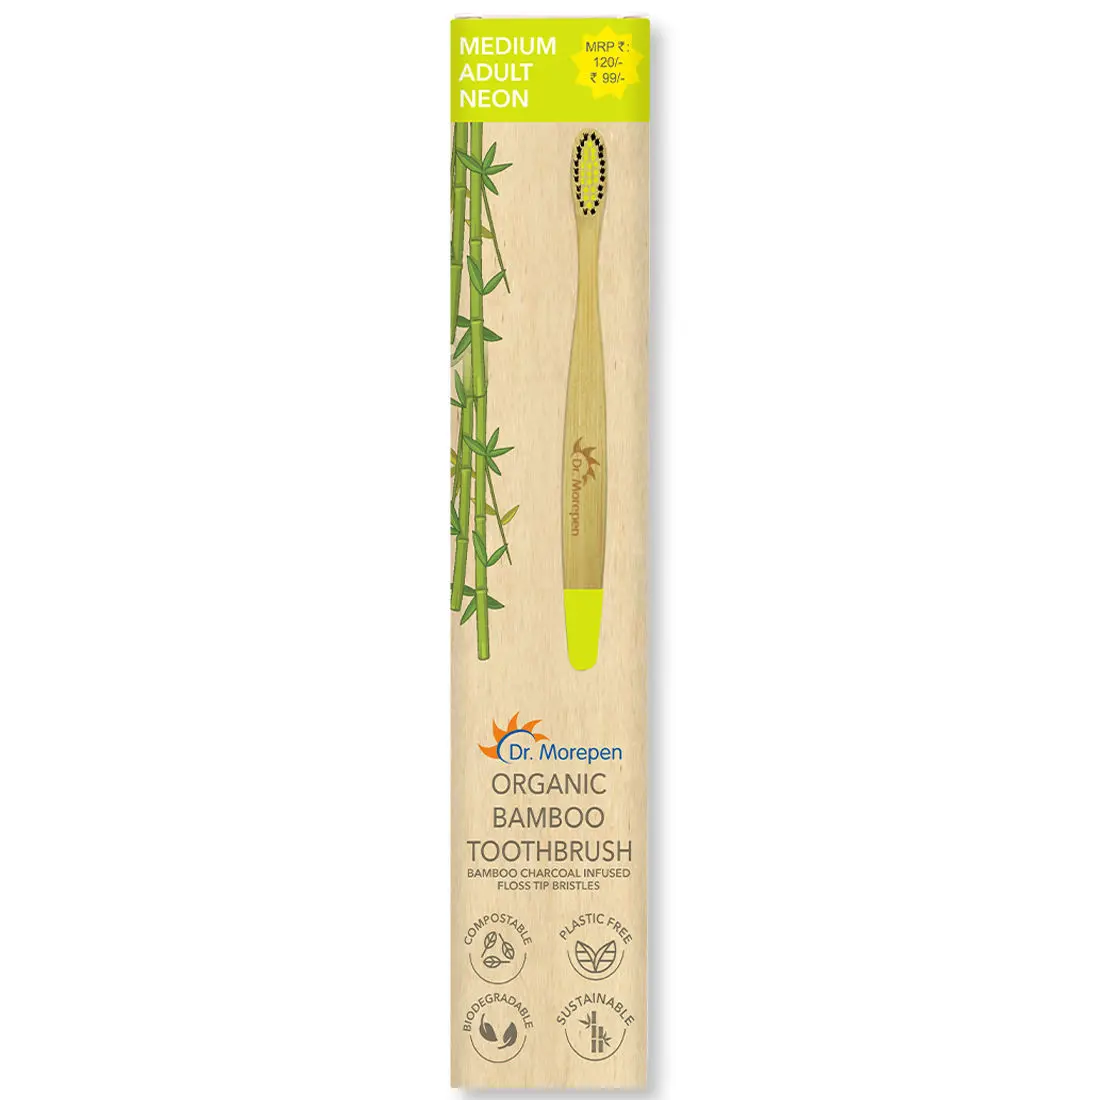 DR. MOREPEN Organic Bamboo Toothbrush For Adults - Neon